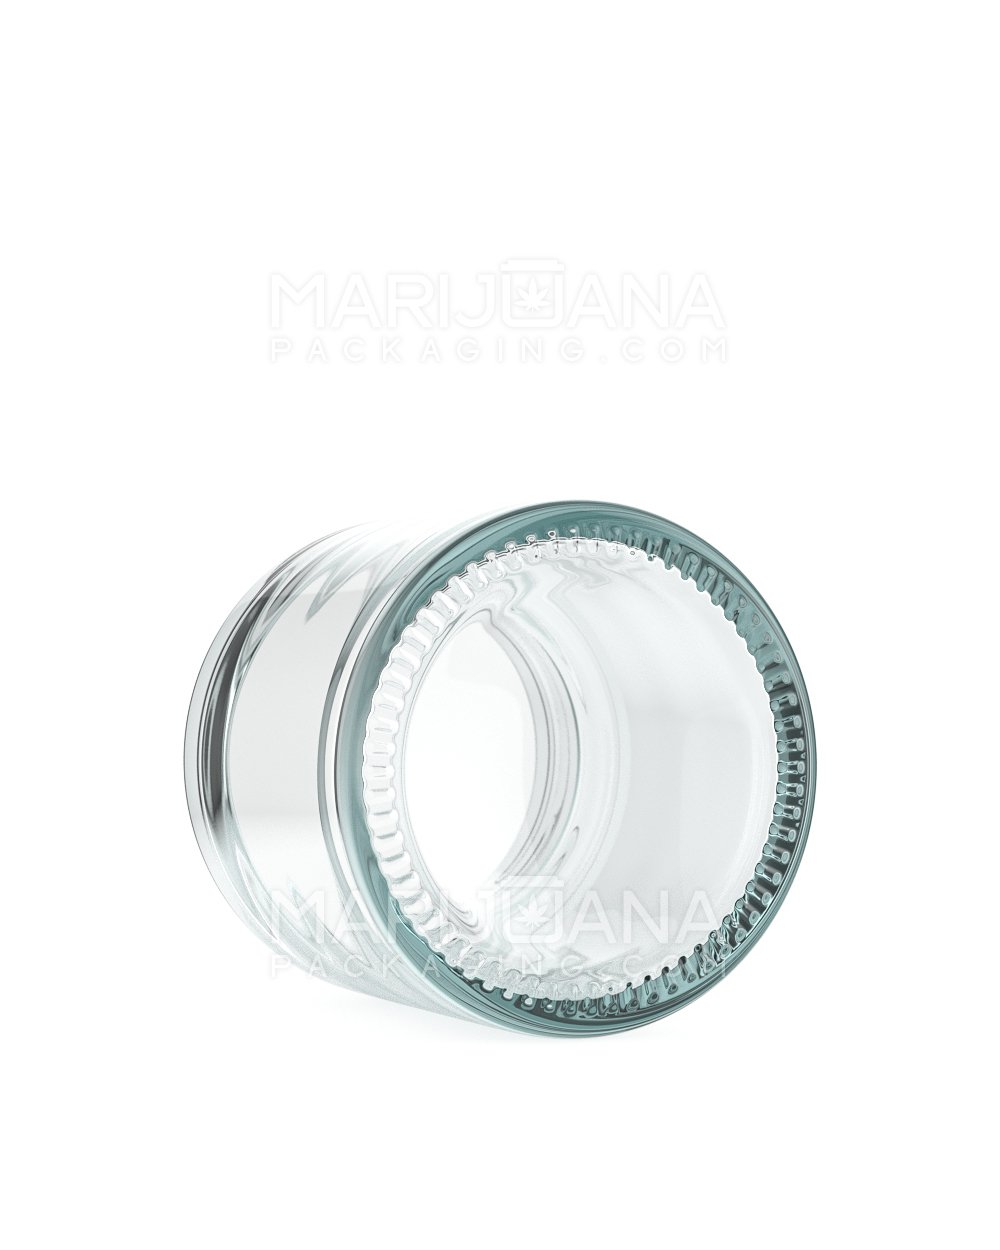 Straight Sided Clear Glass Jars | 50mm - 3oz - 150 Count